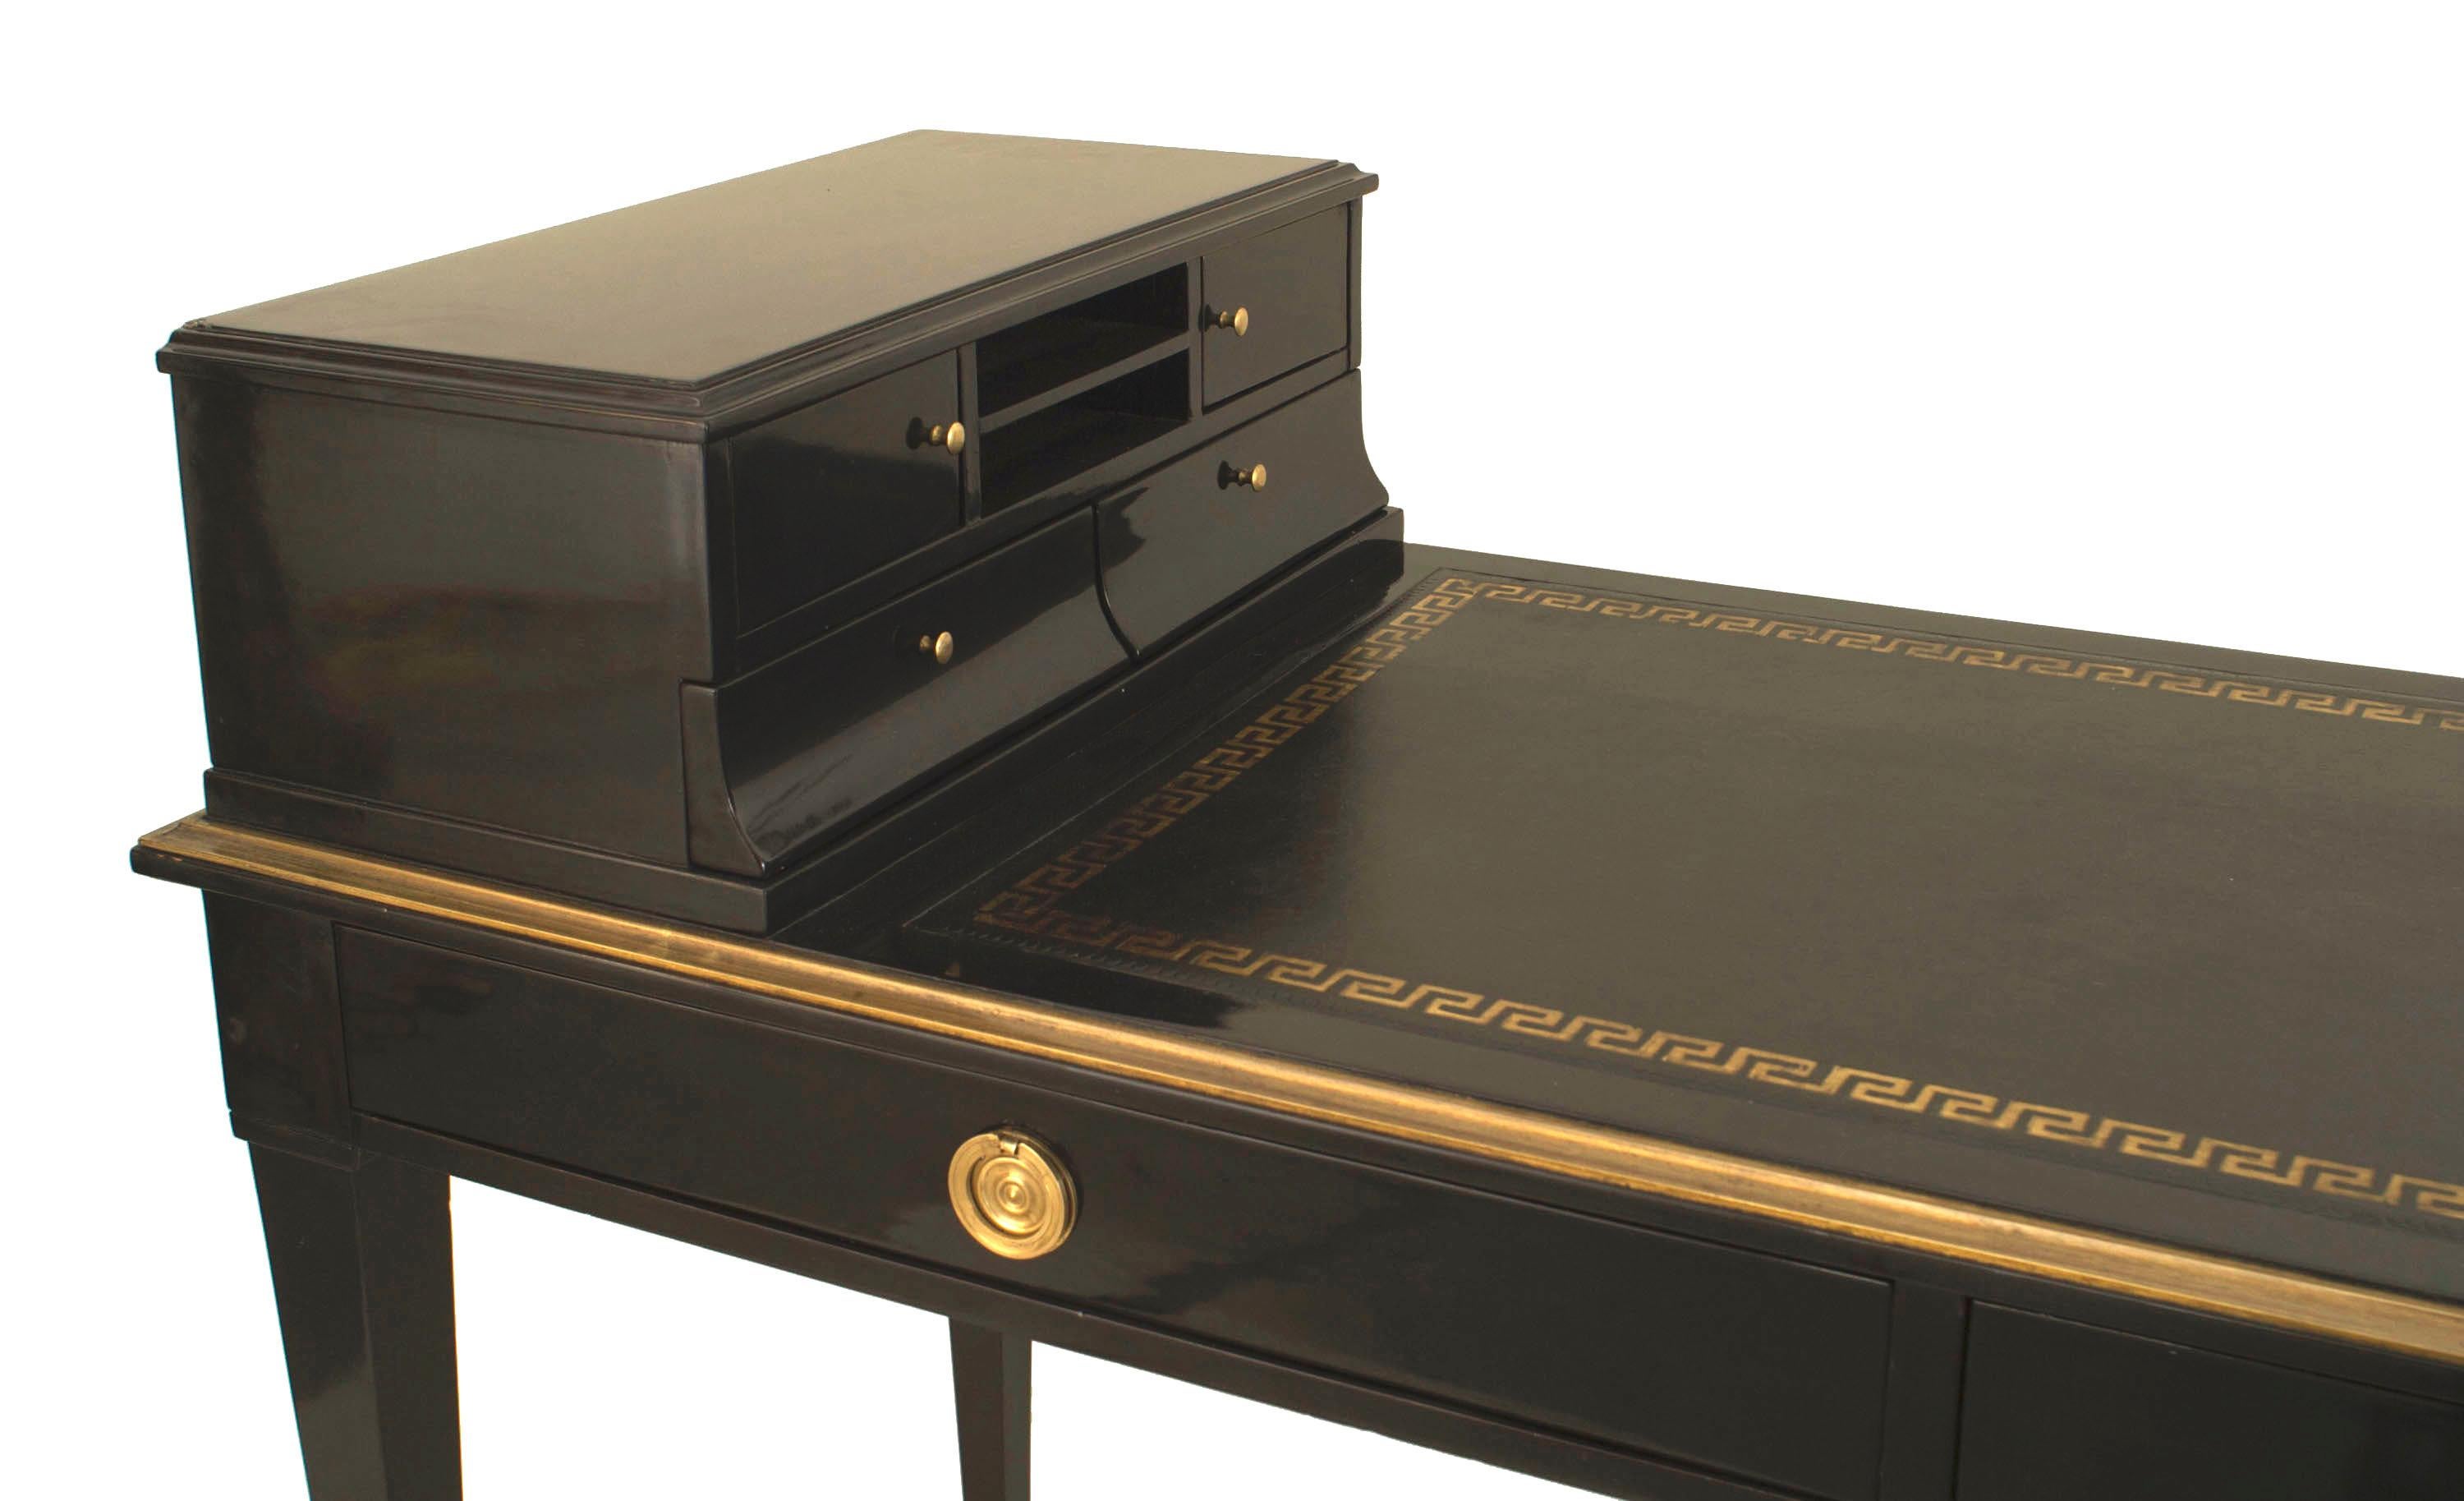 French Louis XVI style (1940s) ebonized & gilt bronze trim desk / cartonnier with 2 drawers and a black leather & gold tooled top supported on 4 tapered square legs. (stamped: JANSEN)
